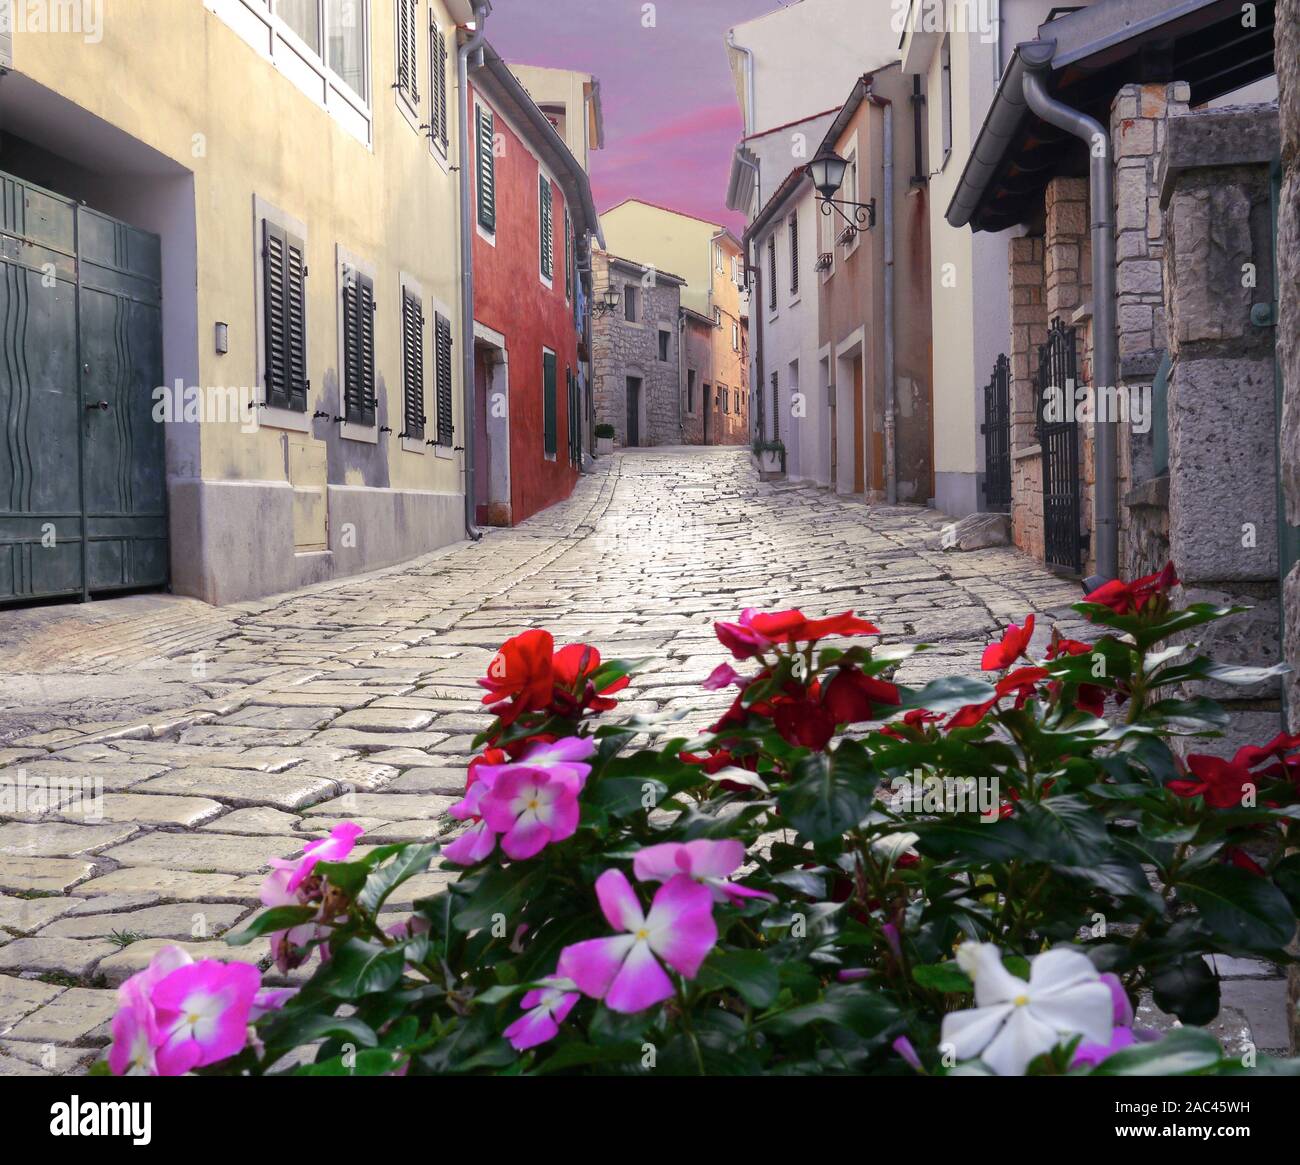 Empty cobblestone street of UNESCO town of Rovinj, Croatia and planted colorful flowers in the foreground. Stock Photo